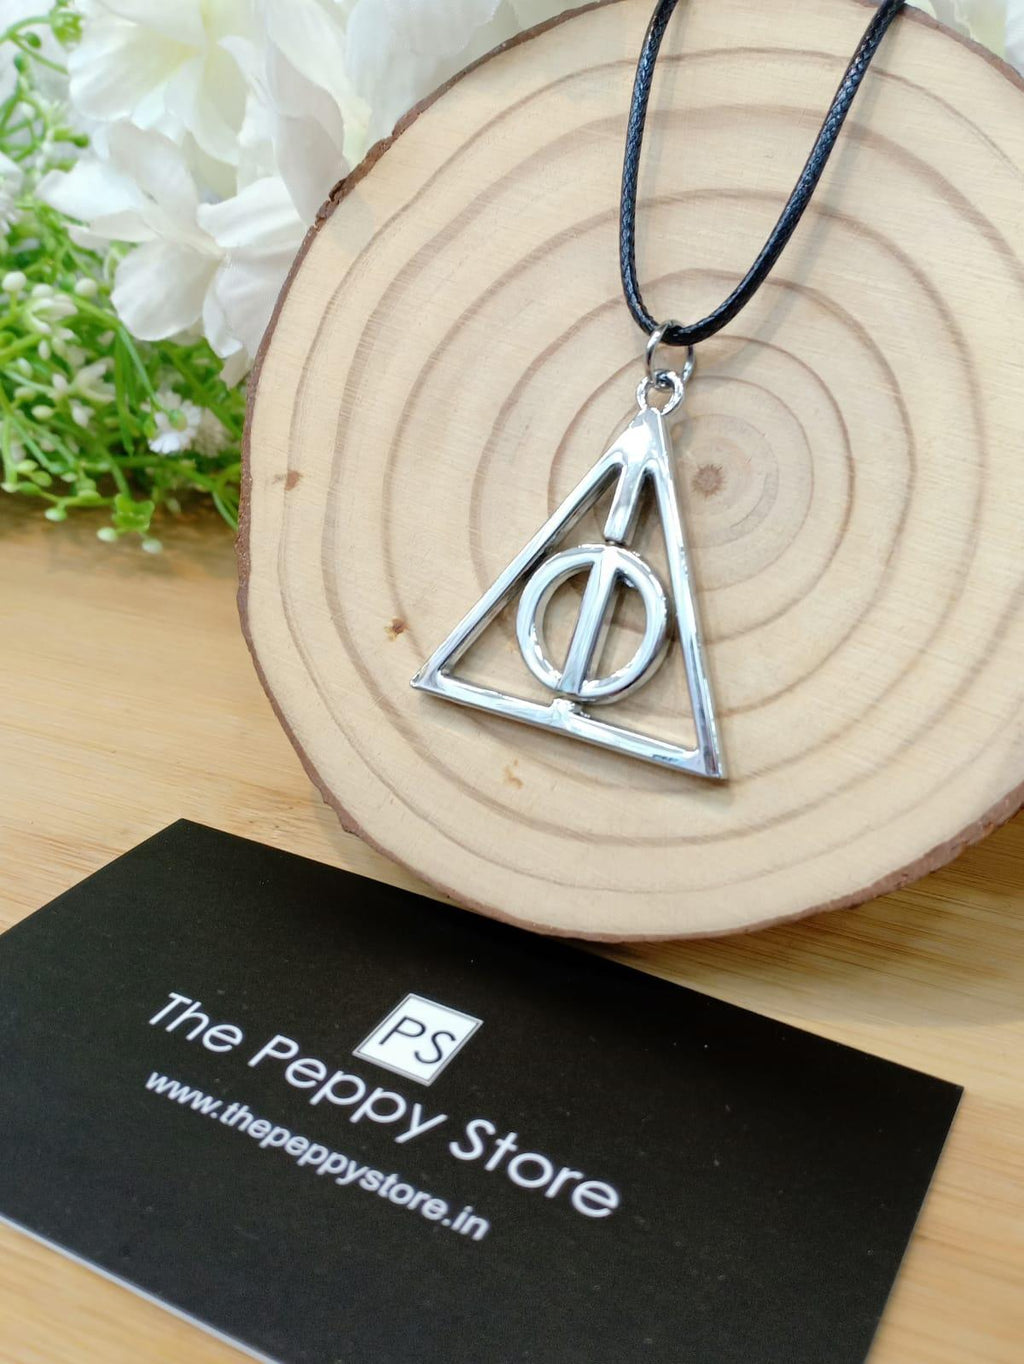 HARRY POTTER Xenophilius Lovegood's Necklace - Harry Potter Deathly Hallows  - Xenophilius Lovegood's Necklace - Harry Potter Deathly Hallows . Buy  Action Figures toys in India. shop for HARRY POTTER products in India. |  Flipkart.com